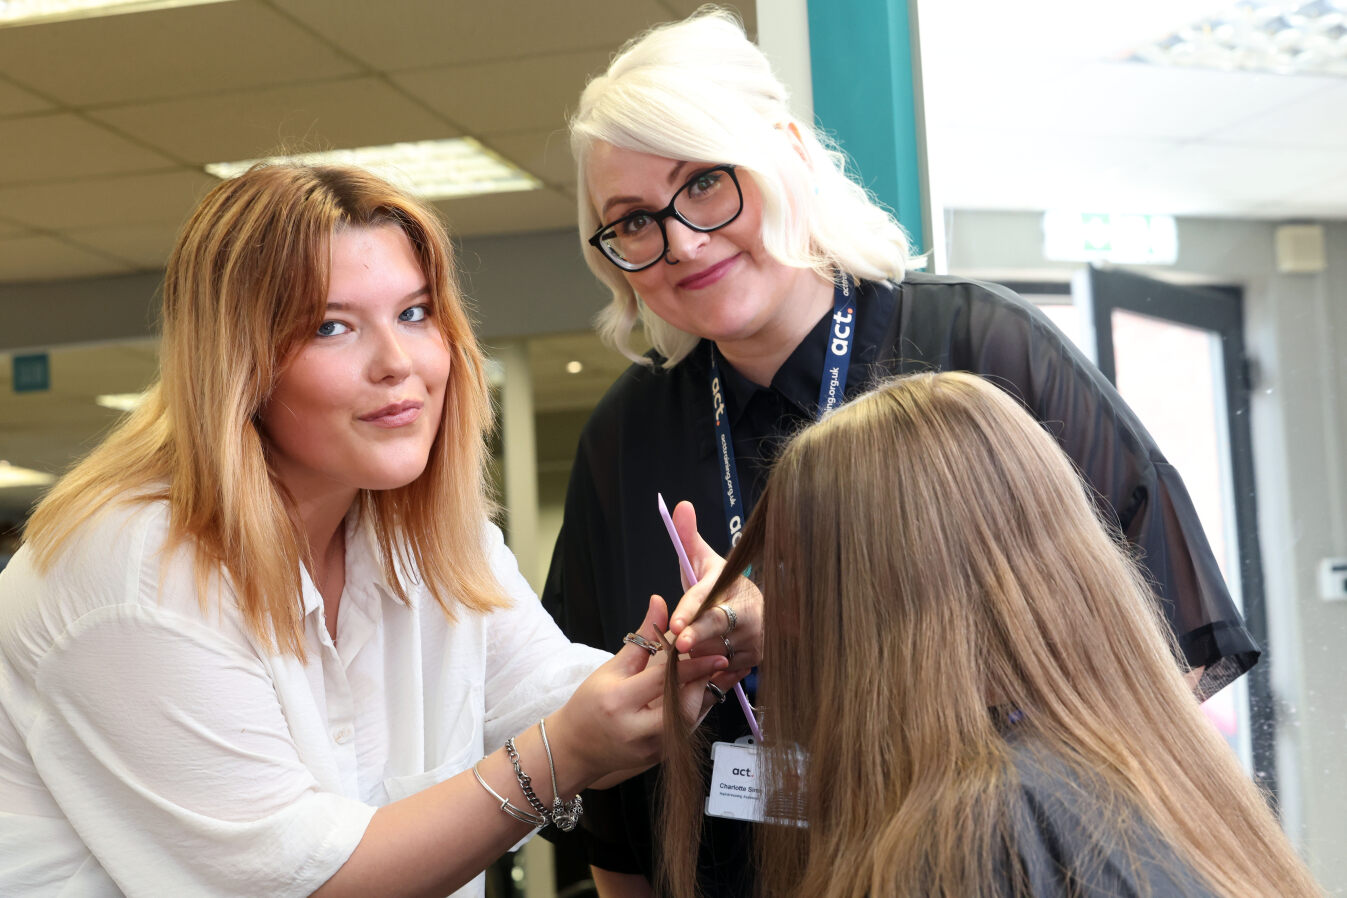 Course offers solid start for learner with a passion for hair